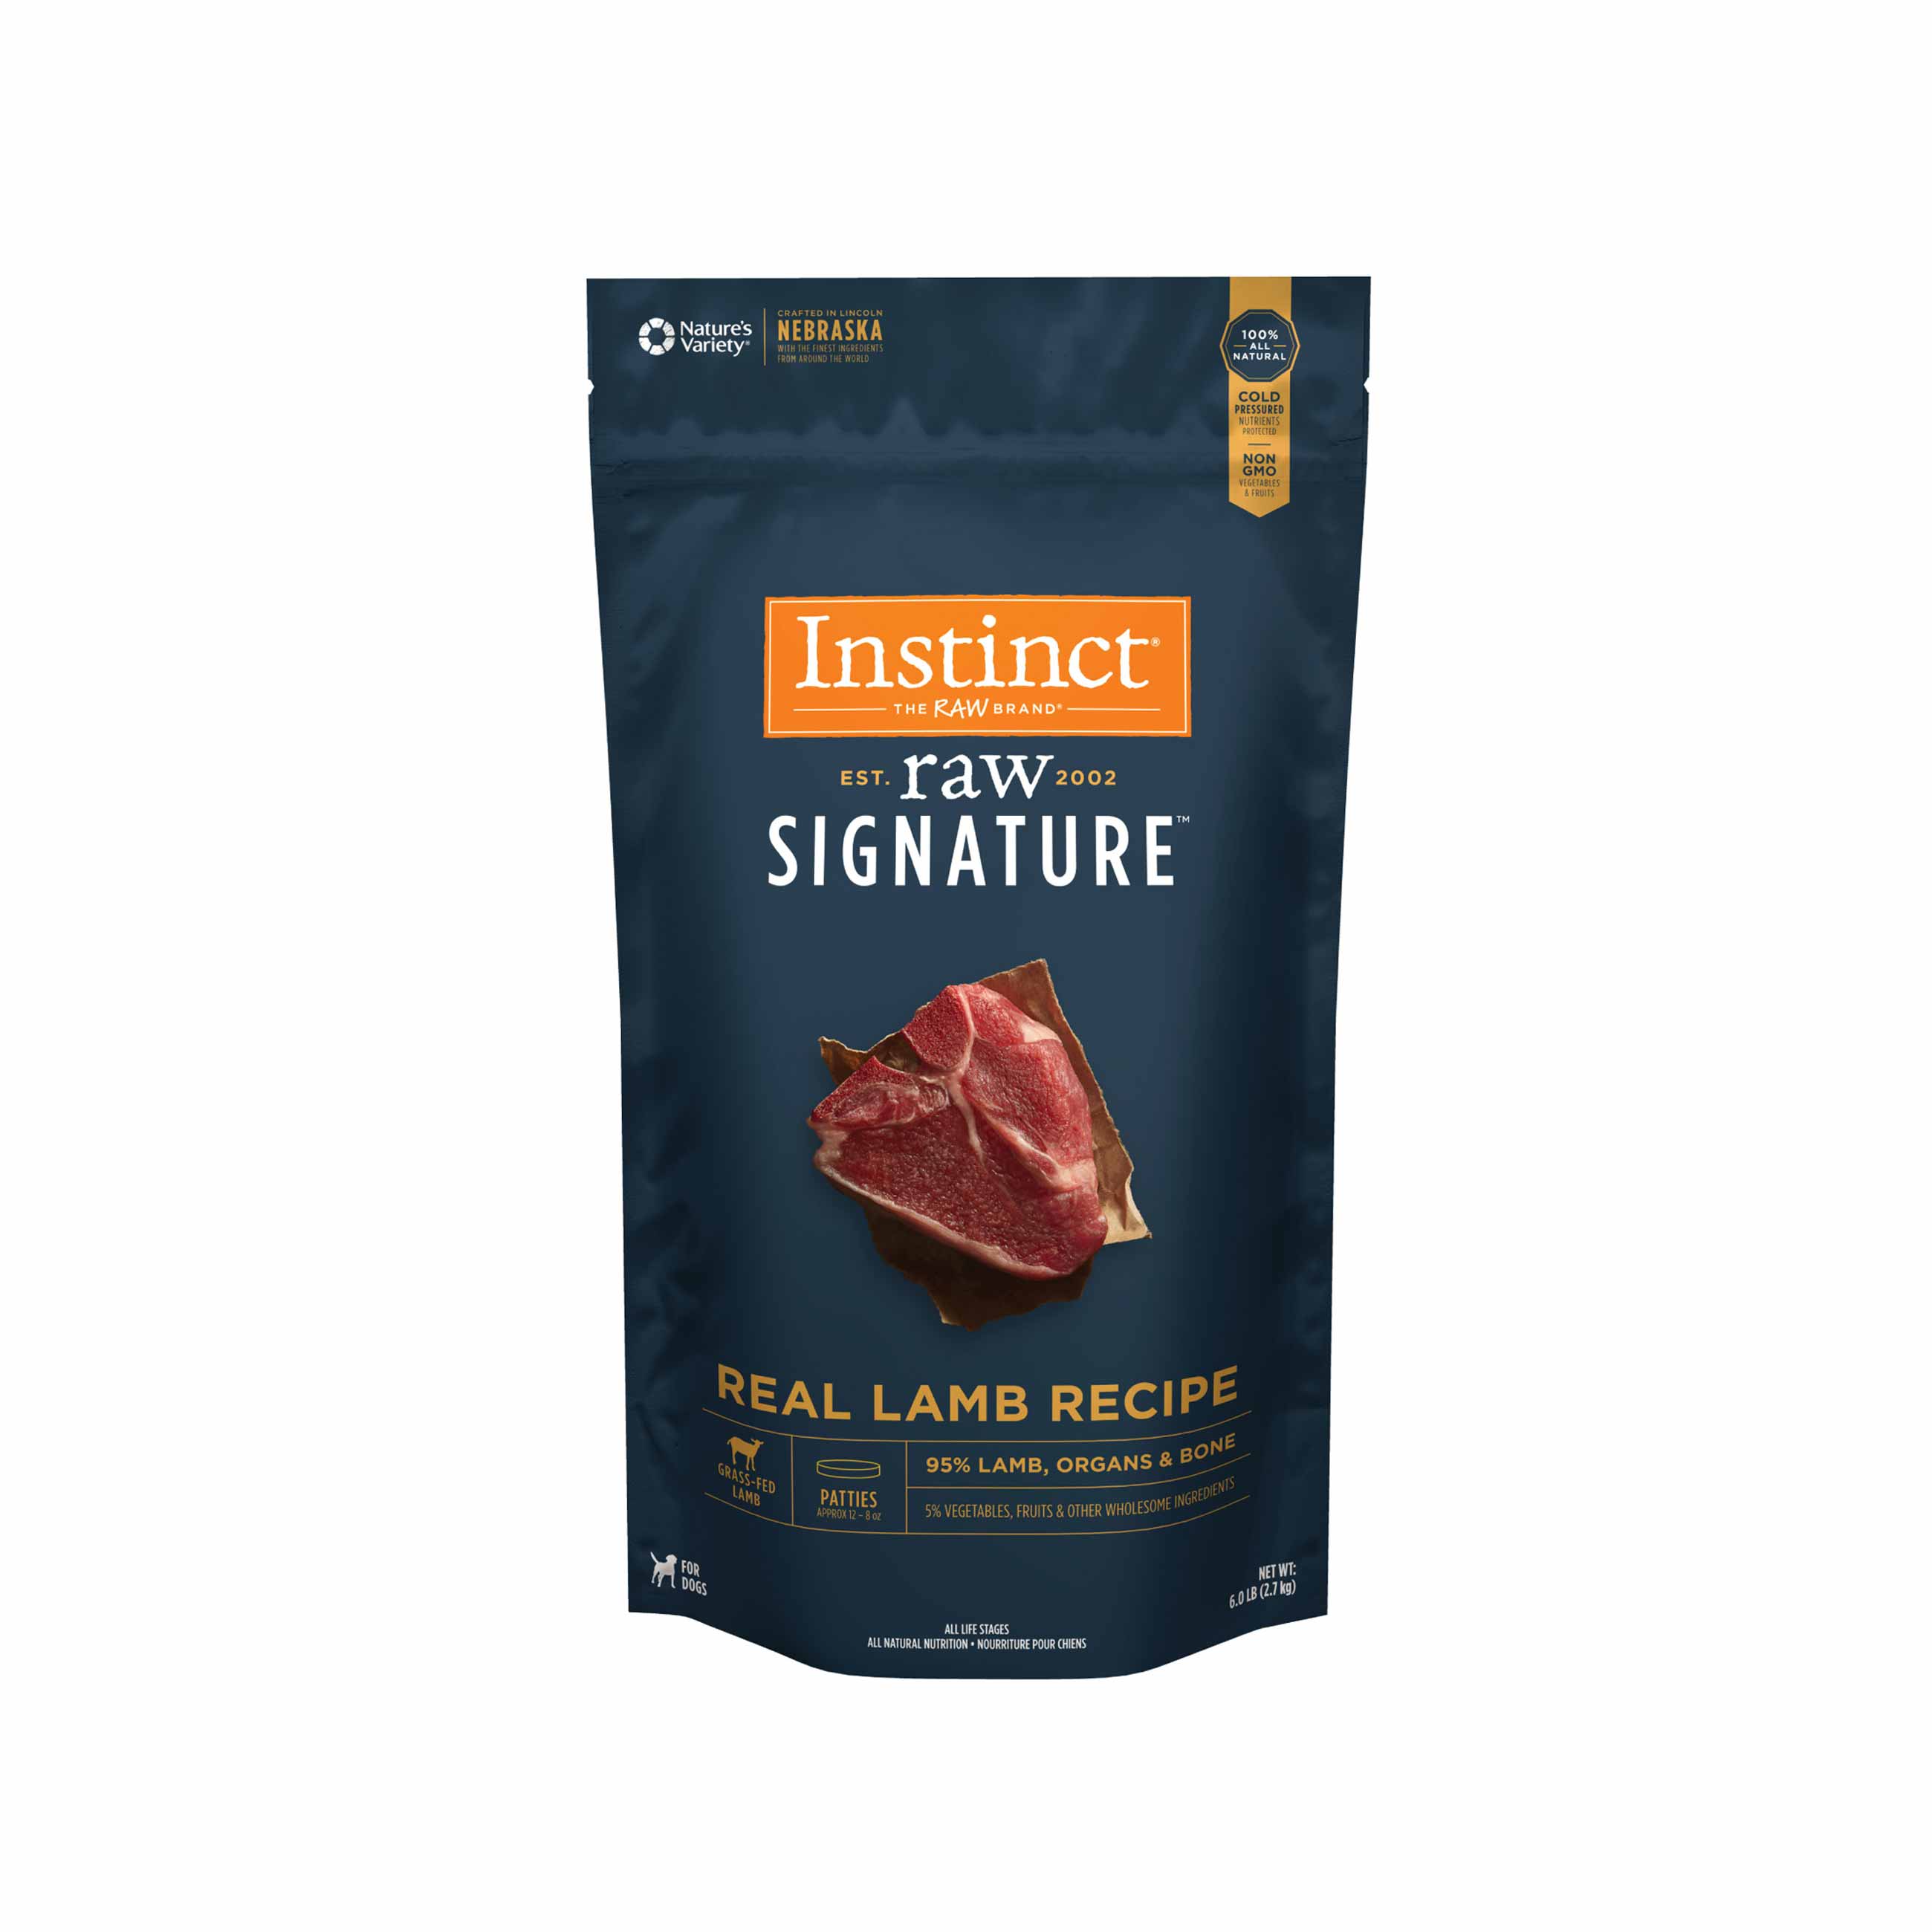 Instinct Frozen Raw Signature Patties Grain-Free Real Lamb Recipe Dog Food, 6 Pound Bag - Not Available for Delivery